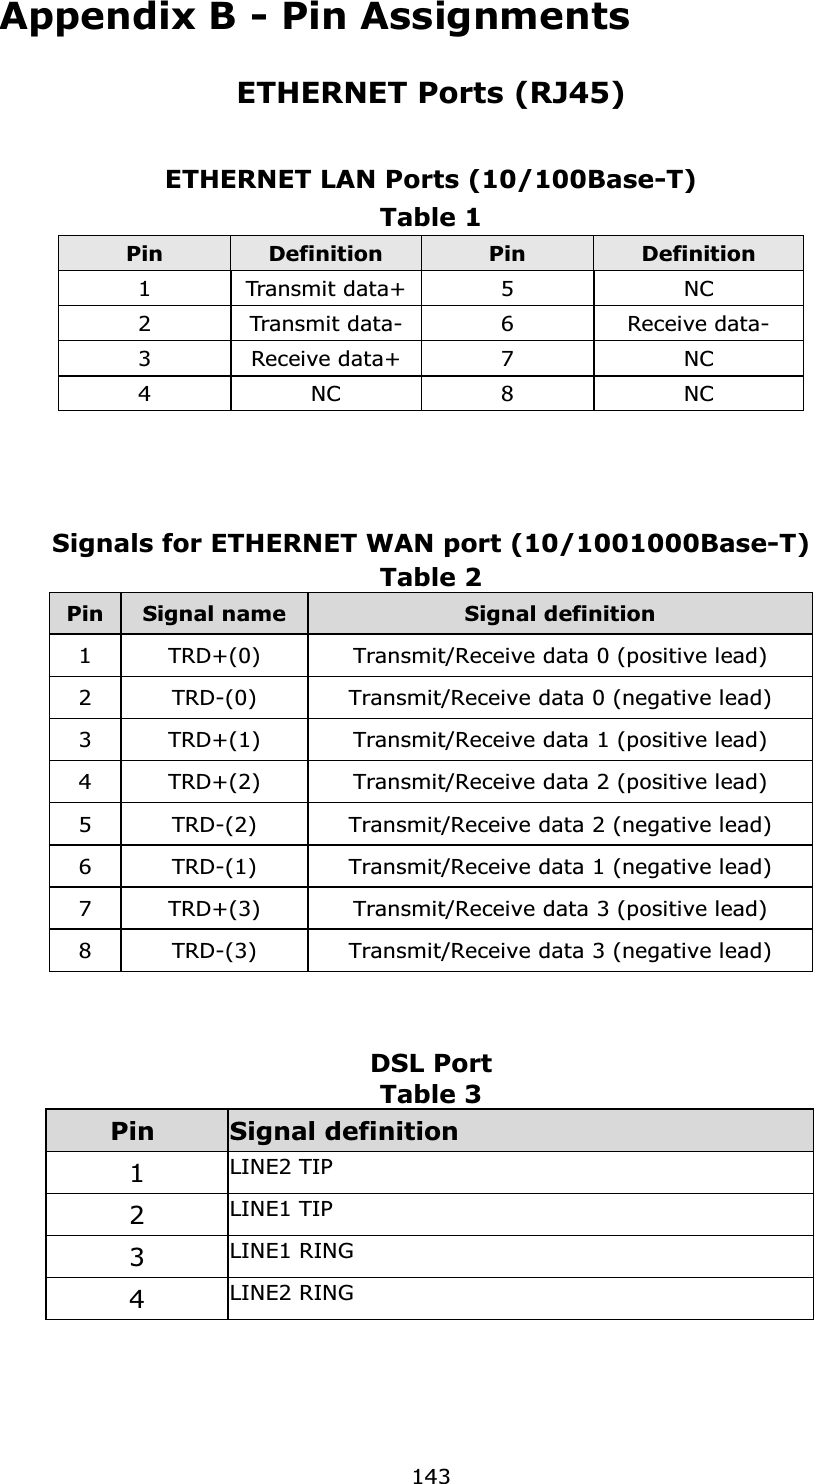  143Appendix B - Pin Assignments ETHERNET Ports (RJ45)   ETHERNET LAN Ports (10/100Base-T) Table 1 Pin  Definition  Pin  Definition 1  Transmit data+ 5  NC 2  Transmit data- 6  Receive data- 3  Receive data+  7  NC 4  NC  8  NC      Signals for ETHERNET WAN port (10/1001000Base-T) Table 2    Pin Signal name Signal definition 1  TRD+(0)  Transmit/Receive data 0 (positive lead) 2  TRD-(0)  Transmit/Receive data 0 (negative lead) 3  TRD+(1)  Transmit/Receive data 1 (positive lead) 4  TRD+(2)  Transmit/Receive data 2 (positive lead) 5  TRD-(2)  Transmit/Receive data 2 (negative lead) 6  TRD-(1)  Transmit/Receive data 1 (negative lead) 7  TRD+(3)  Transmit/Receive data 3 (positive lead) 8  TRD-(3)  Transmit/Receive data 3 (negative lead)    DSL Port Table 3   Pin Signal definition 1 LINE2 TIP2 LINE1 TIP3 LINE1 RING4 LINE2 RING  